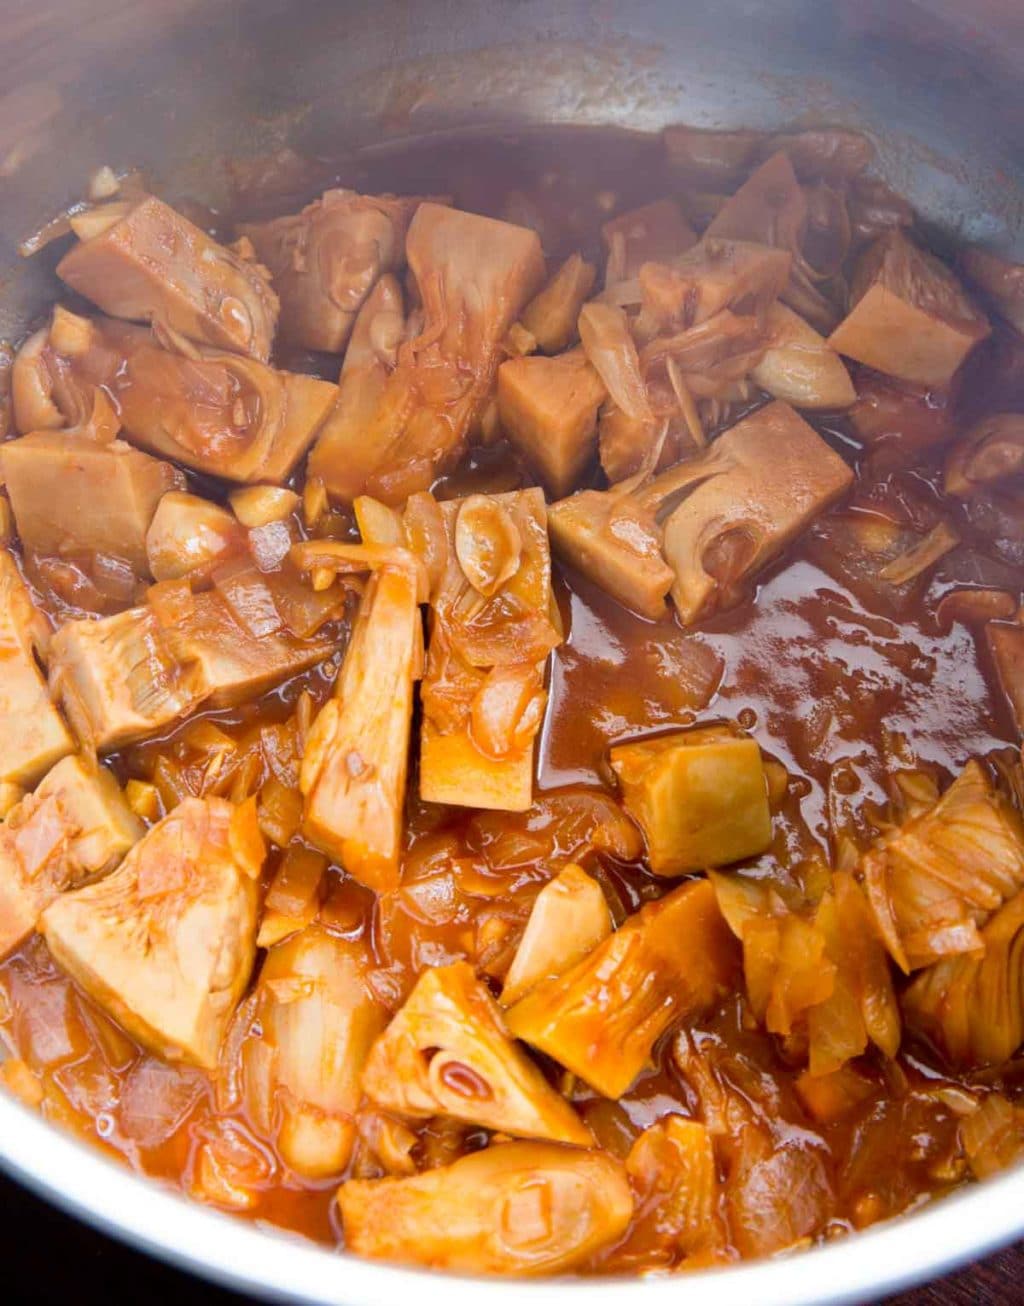 Pulled BBQ Jackfruit - cooking in the bbq sauce, before pulling